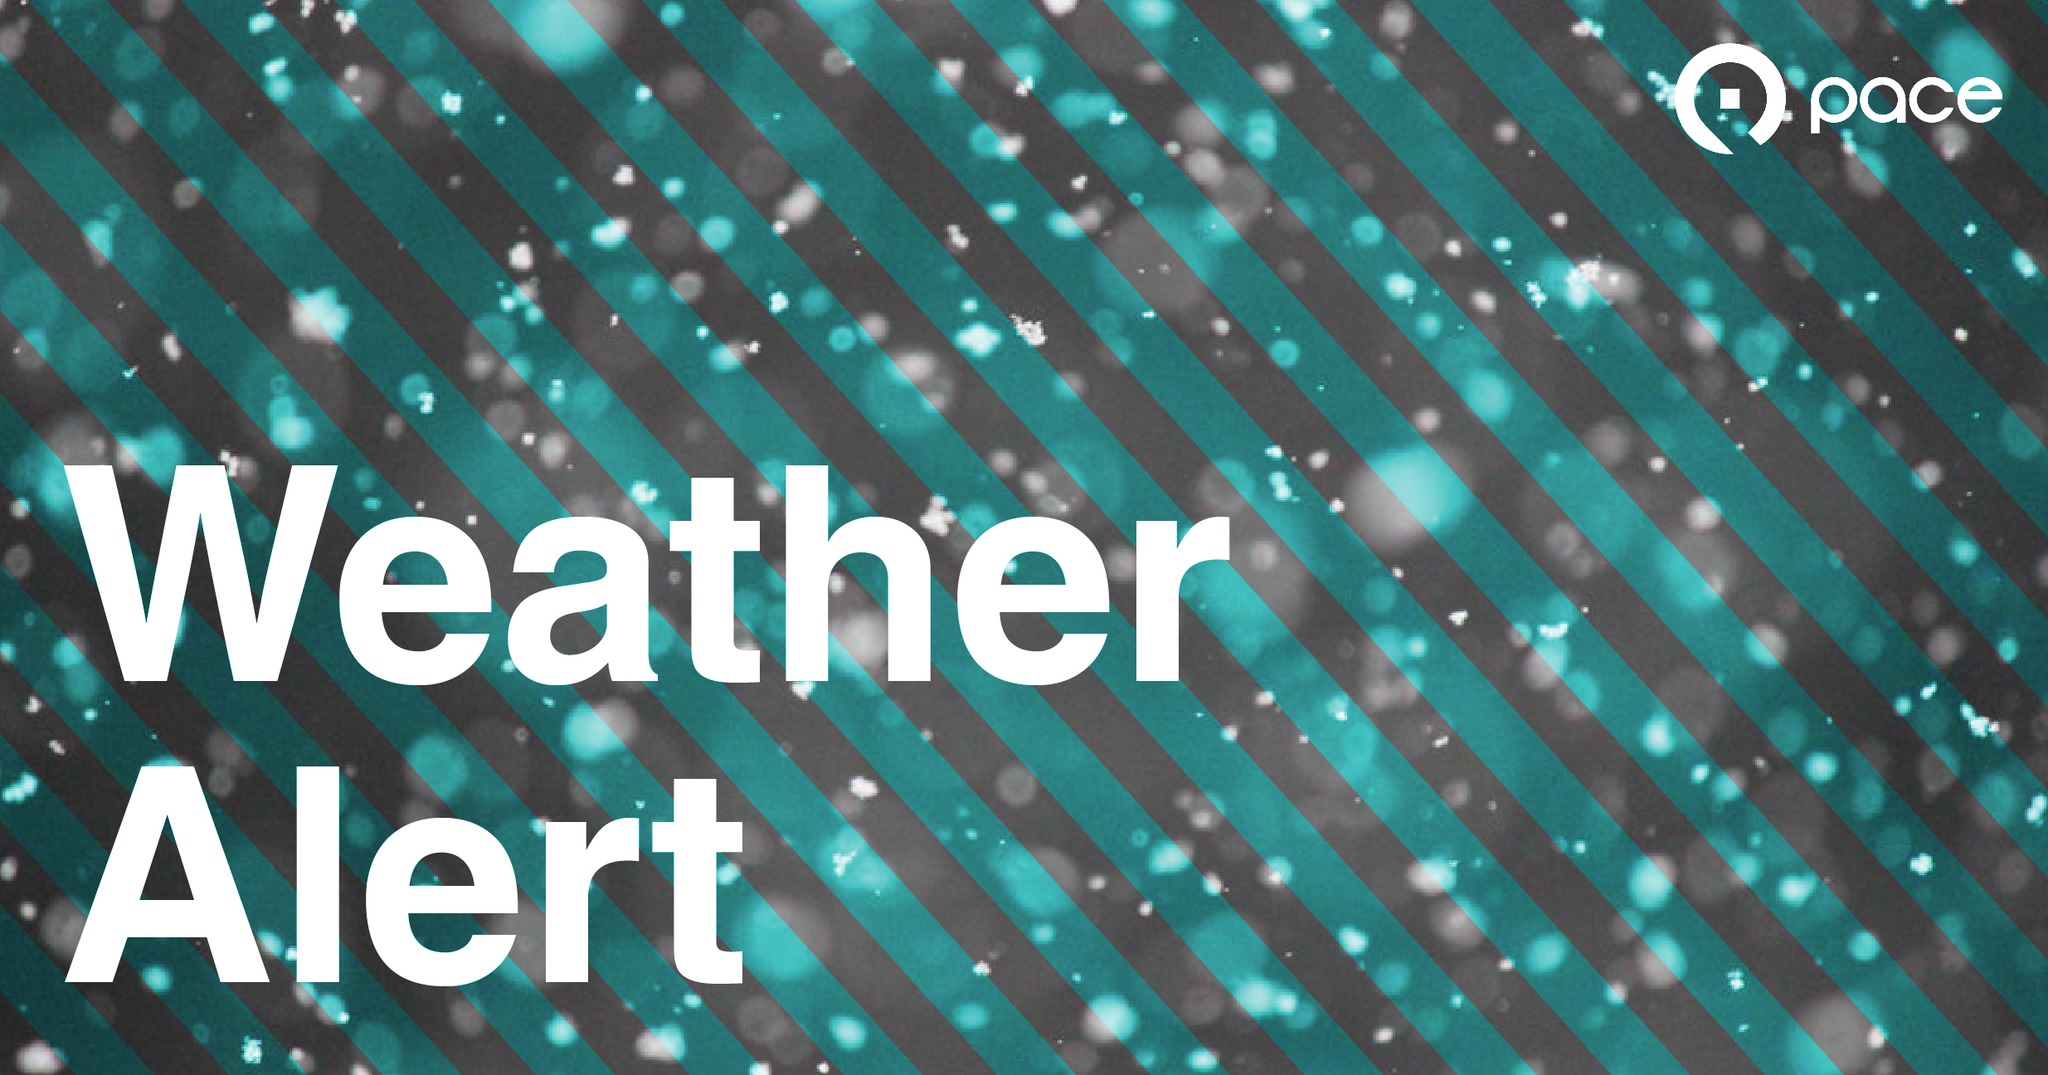 Graphic showing rain drops with text that says weather alert